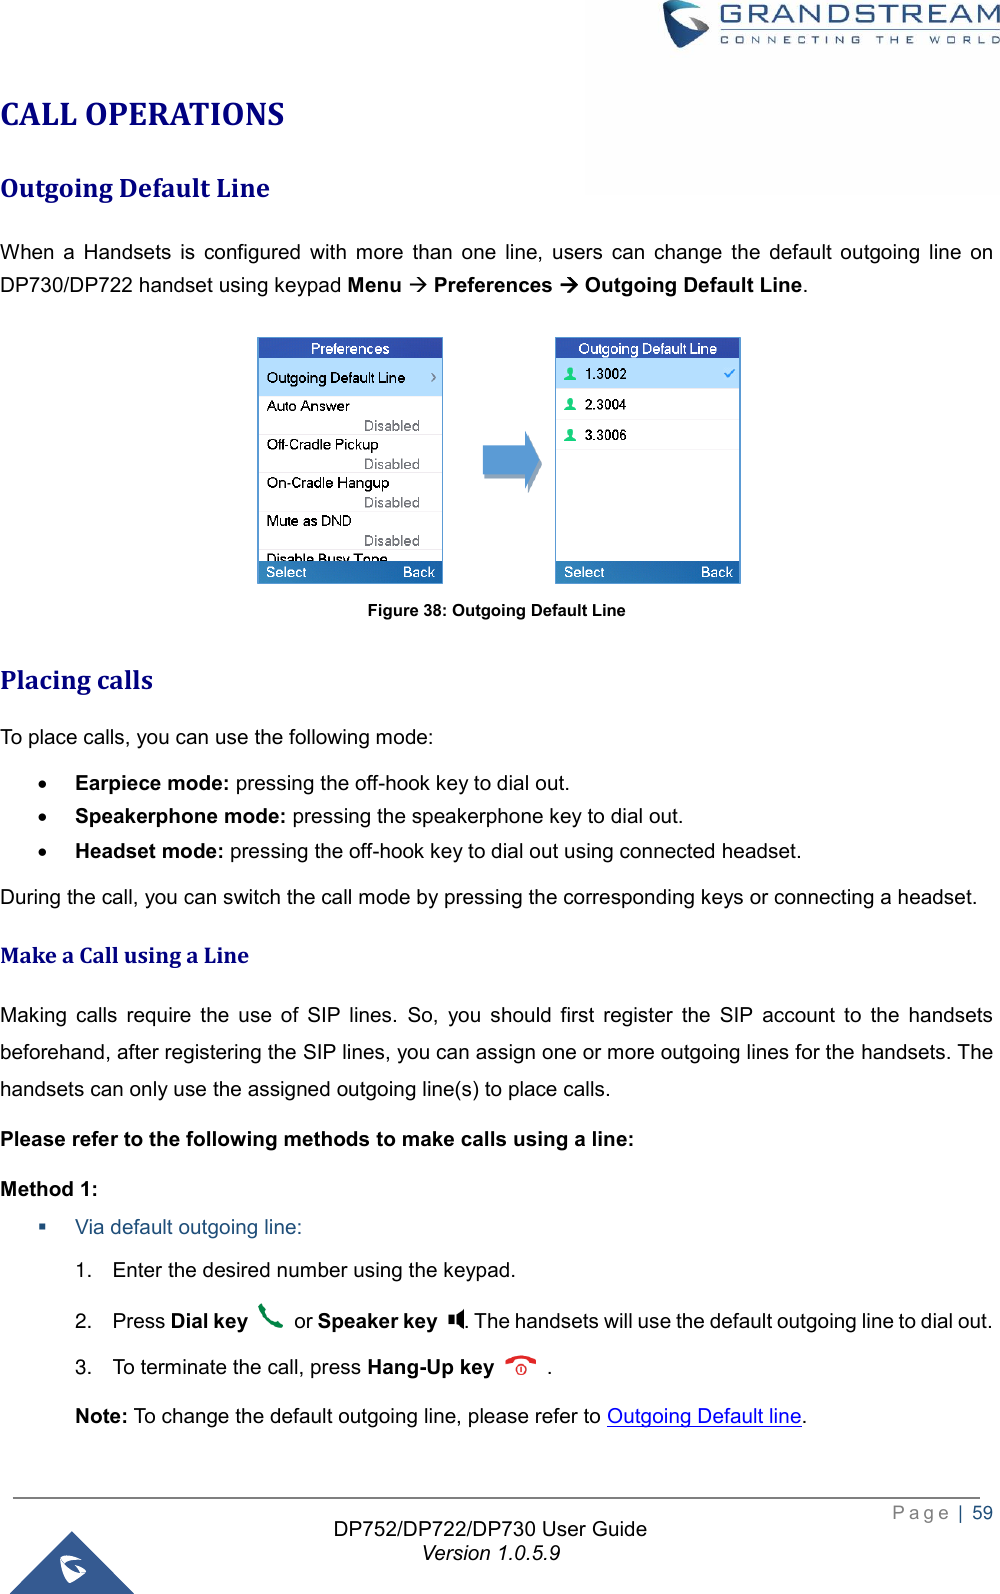  P a g e  |  59   DP752/DP722/DP730 User Guide Version 1.0.5.9   CALL OPERATIONS Outgoing Default Line  When  a  Handsets  is  configured  with  more  than  one  line,  users  can  change  the  default  outgoing  line  on DP730/DP722 handset using keypad Menu → Preferences → Outgoing Default Line.                               Figure 38: Outgoing Default Line Placing calls   To place calls, you can use the following mode:   • Earpiece mode: pressing the off-hook key to dial out.   • Speakerphone mode: pressing the speakerphone key to dial out.   • Headset mode: pressing the off-hook key to dial out using connected headset. During the call, you can switch the call mode by pressing the corresponding keys or connecting a headset. Make a Call using a Line Making  calls  require  the  use  of  SIP  lines.  So,  you  should  first  register  the  SIP  account  to  the  handsets beforehand, after registering the SIP lines, you can assign one or more outgoing lines for the handsets. The handsets can only use the assigned outgoing line(s) to place calls.   Please refer to the following methods to make calls using a line: Method 1: ▪ Via default outgoing line: 1. Enter the desired number using the keypad. 2. Press Dial key    or Speaker key  . The handsets will use the default outgoing line to dial out.   3. To terminate the call, press Hang-Up key    .   Note: To change the default outgoing line, please refer to Outgoing Default line.   